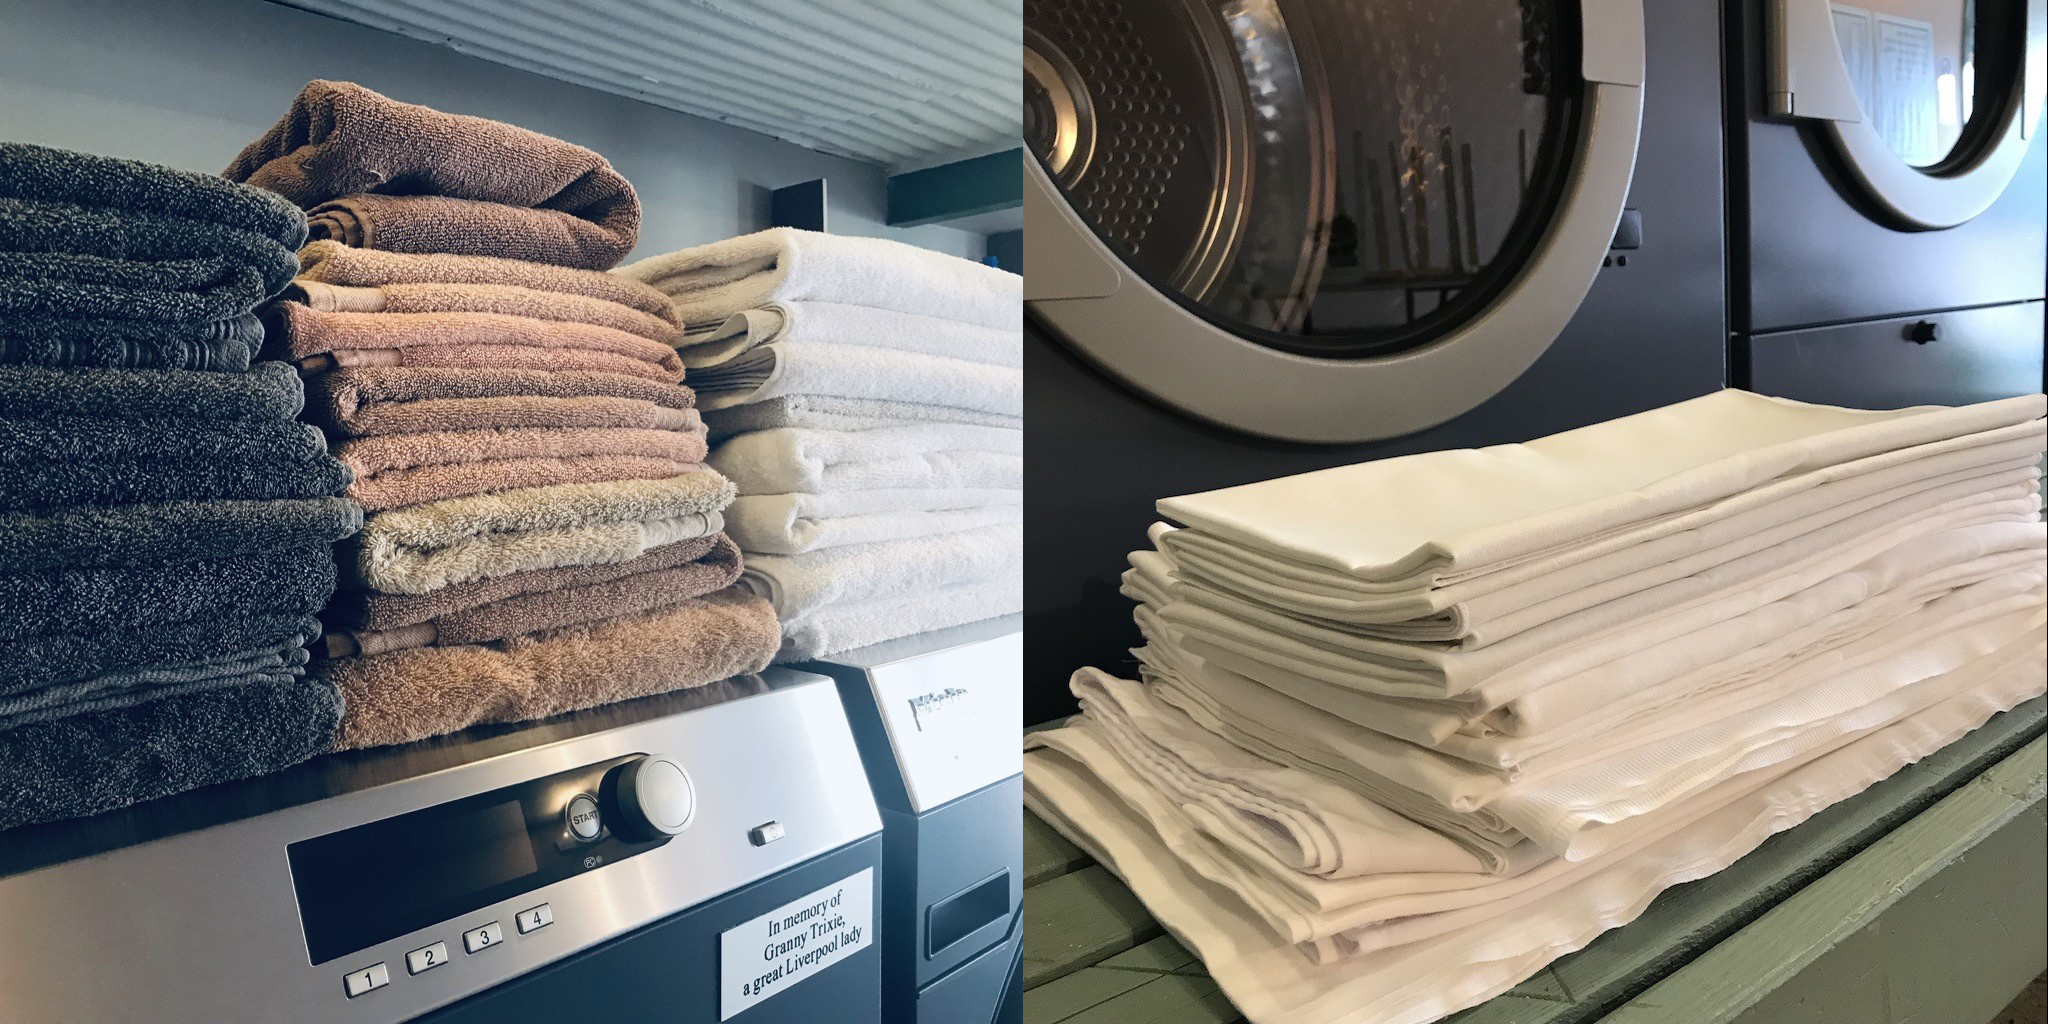 Commercial Laundry Service - Hotel Towels and Bedding